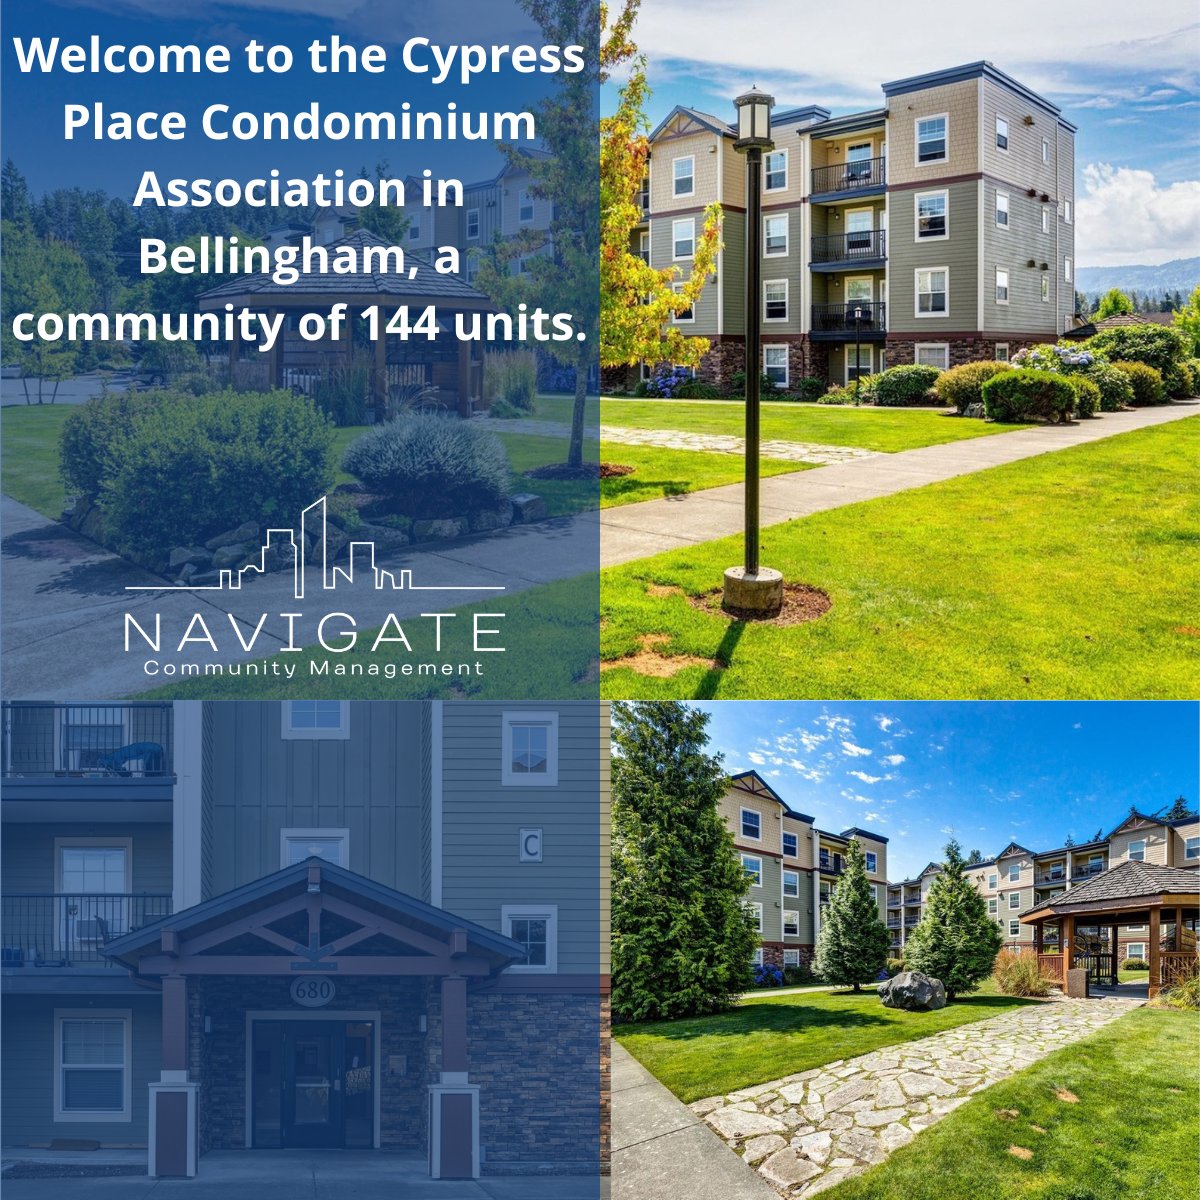 Welcoming another community in Bellingham. Our team is looking forward to serving the Cypress Place Condominium Association, a community of 144 units.
#bellingham #hoamanagement #condomanagement #professionalmanagement  #innoativetechnology #expertservices #communitymanagement